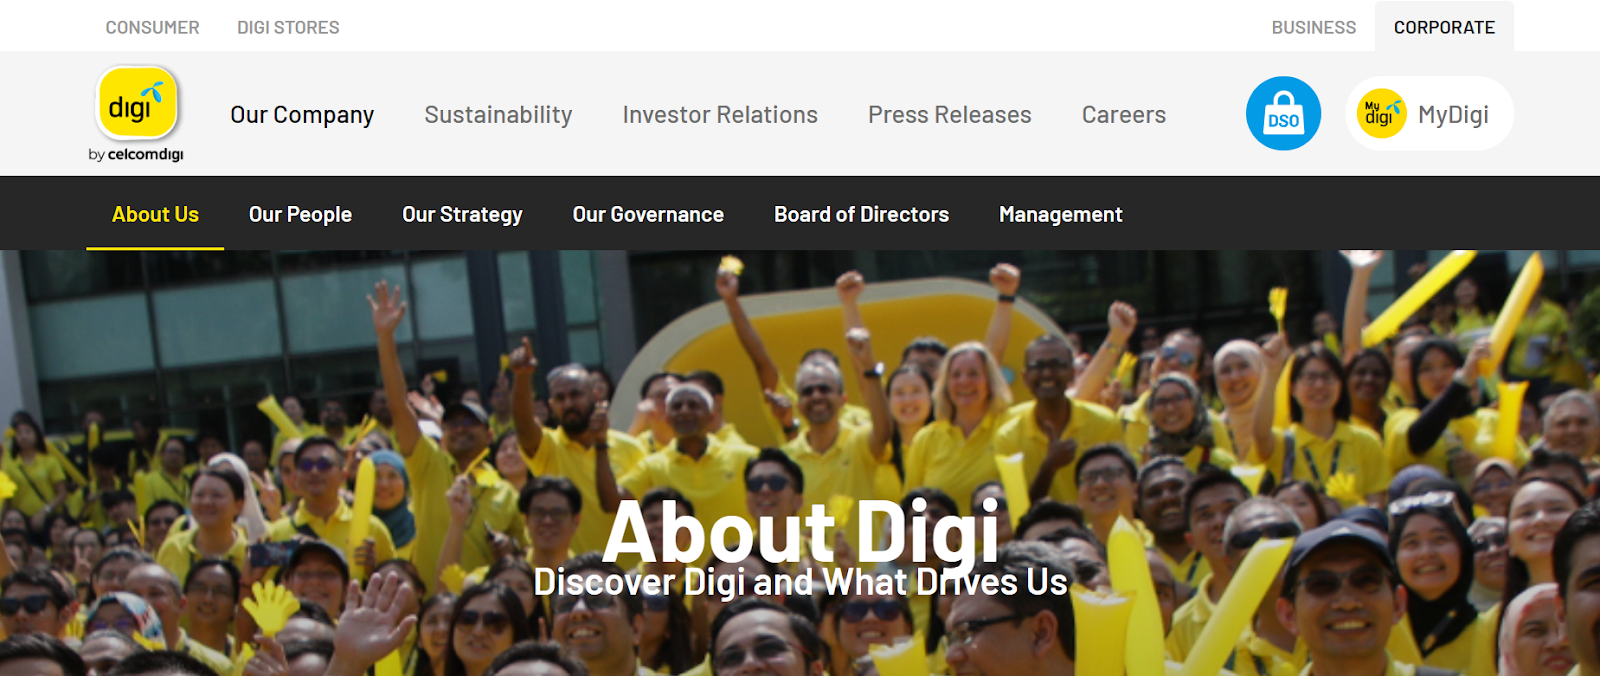 Digi website snapshot highlighting the services it offers.